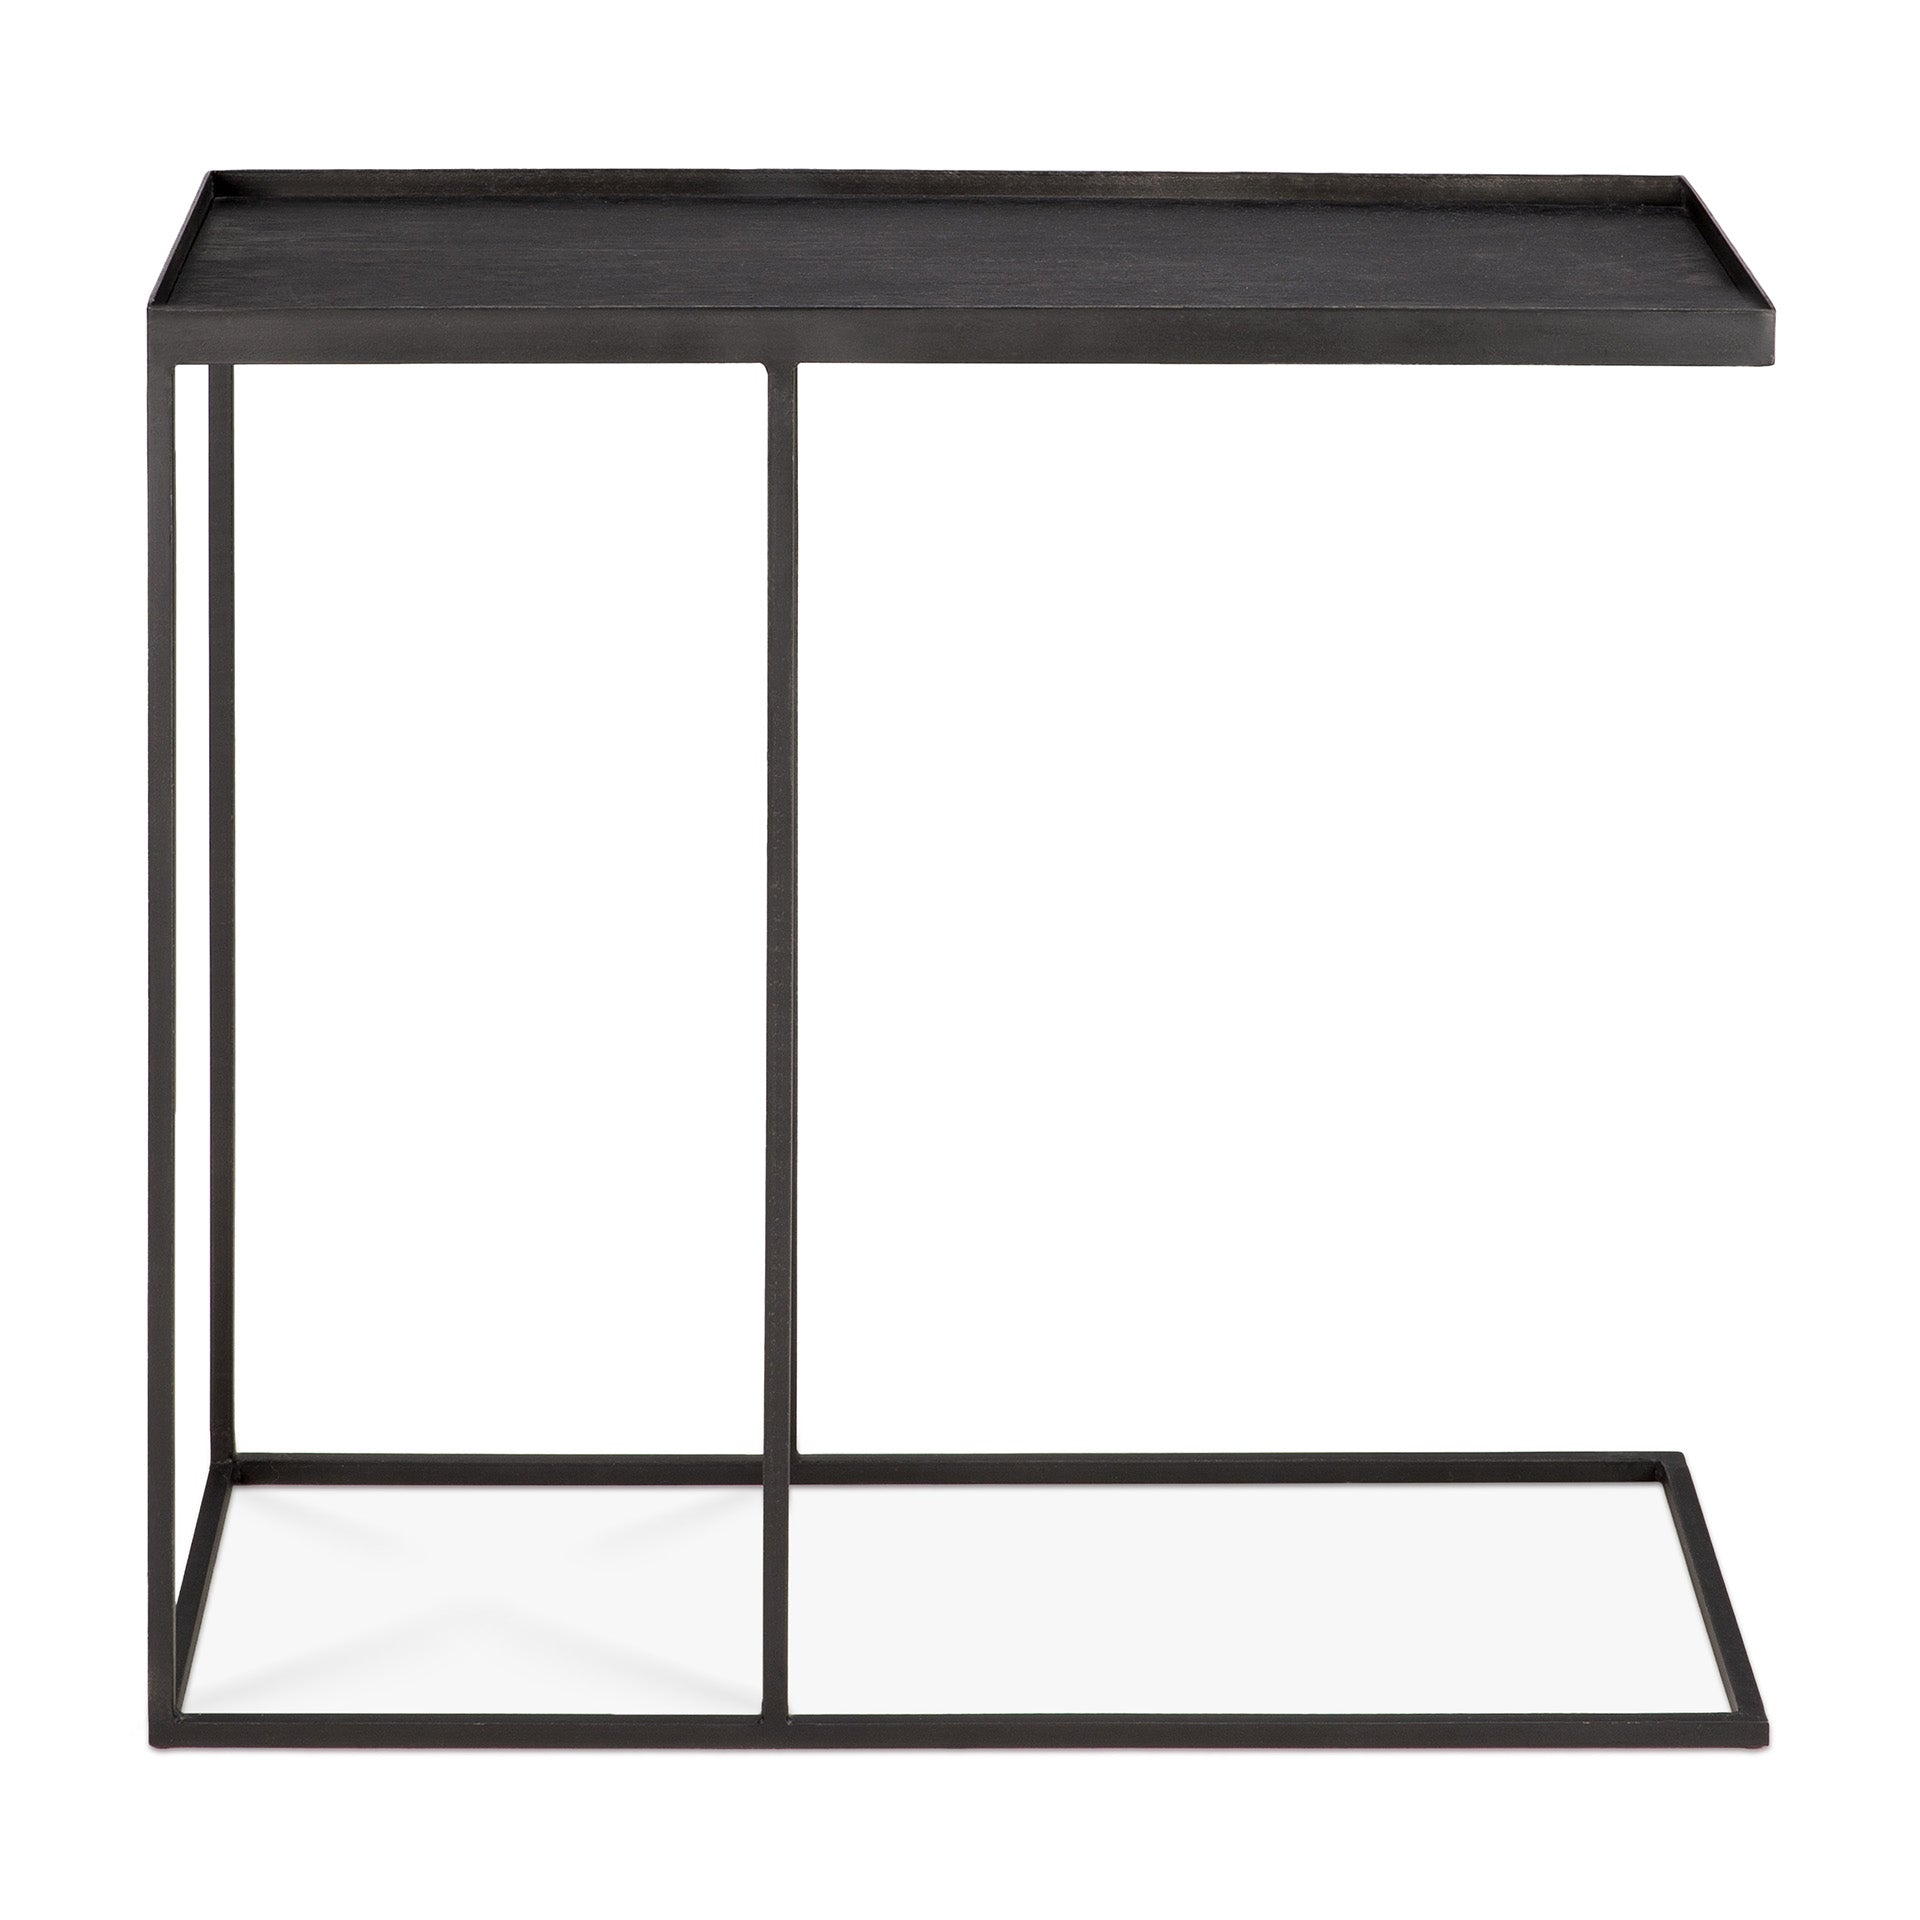 Rectangular Tray Side Table (Tray Not Included)